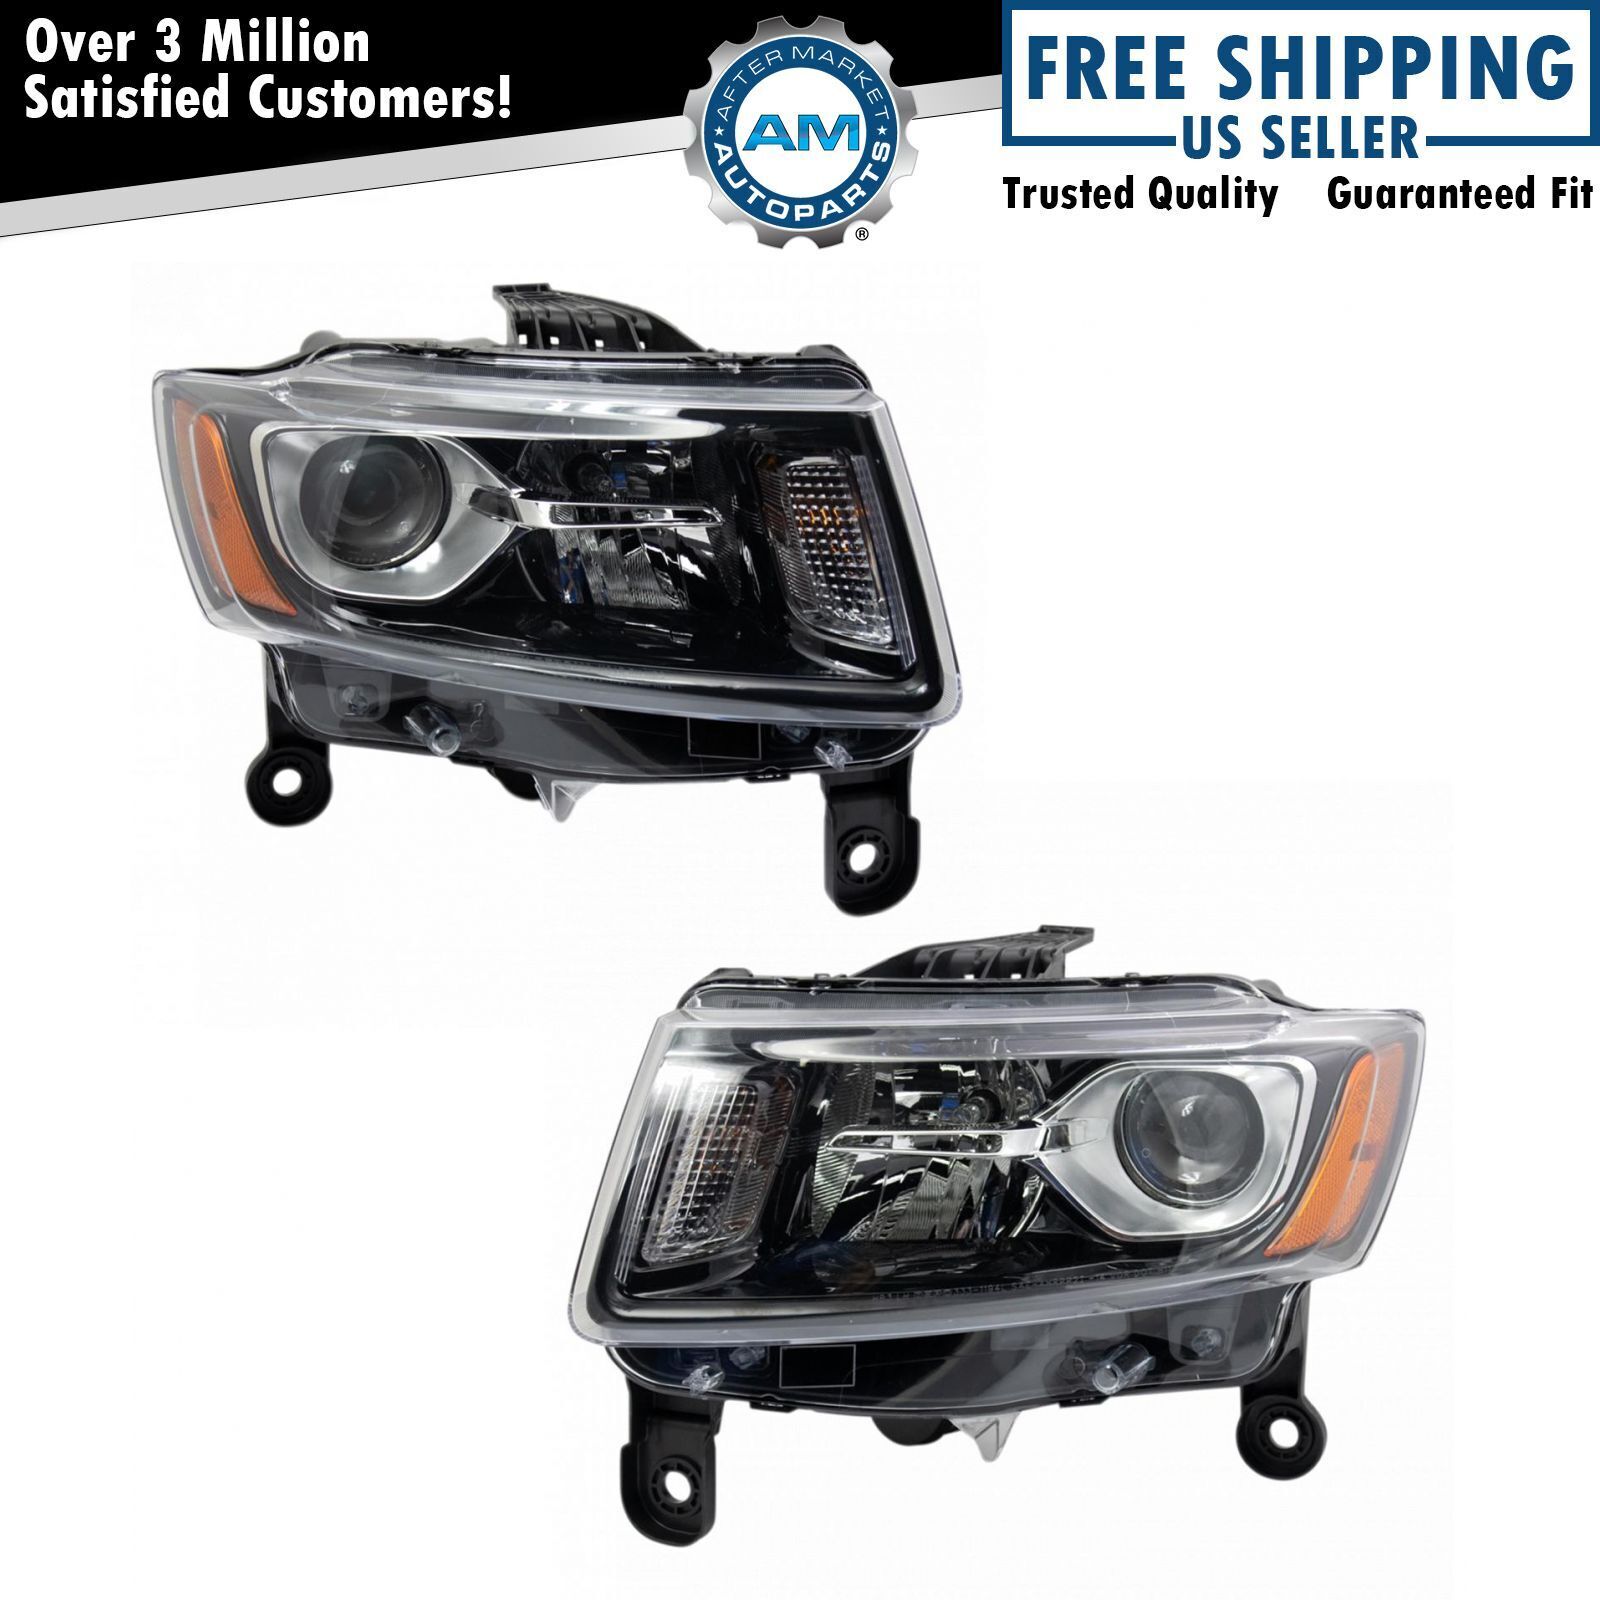 DEPO Headlight Lamp Assembly Pair LH & RH Sides for Jeep Grand Cherokee SUV